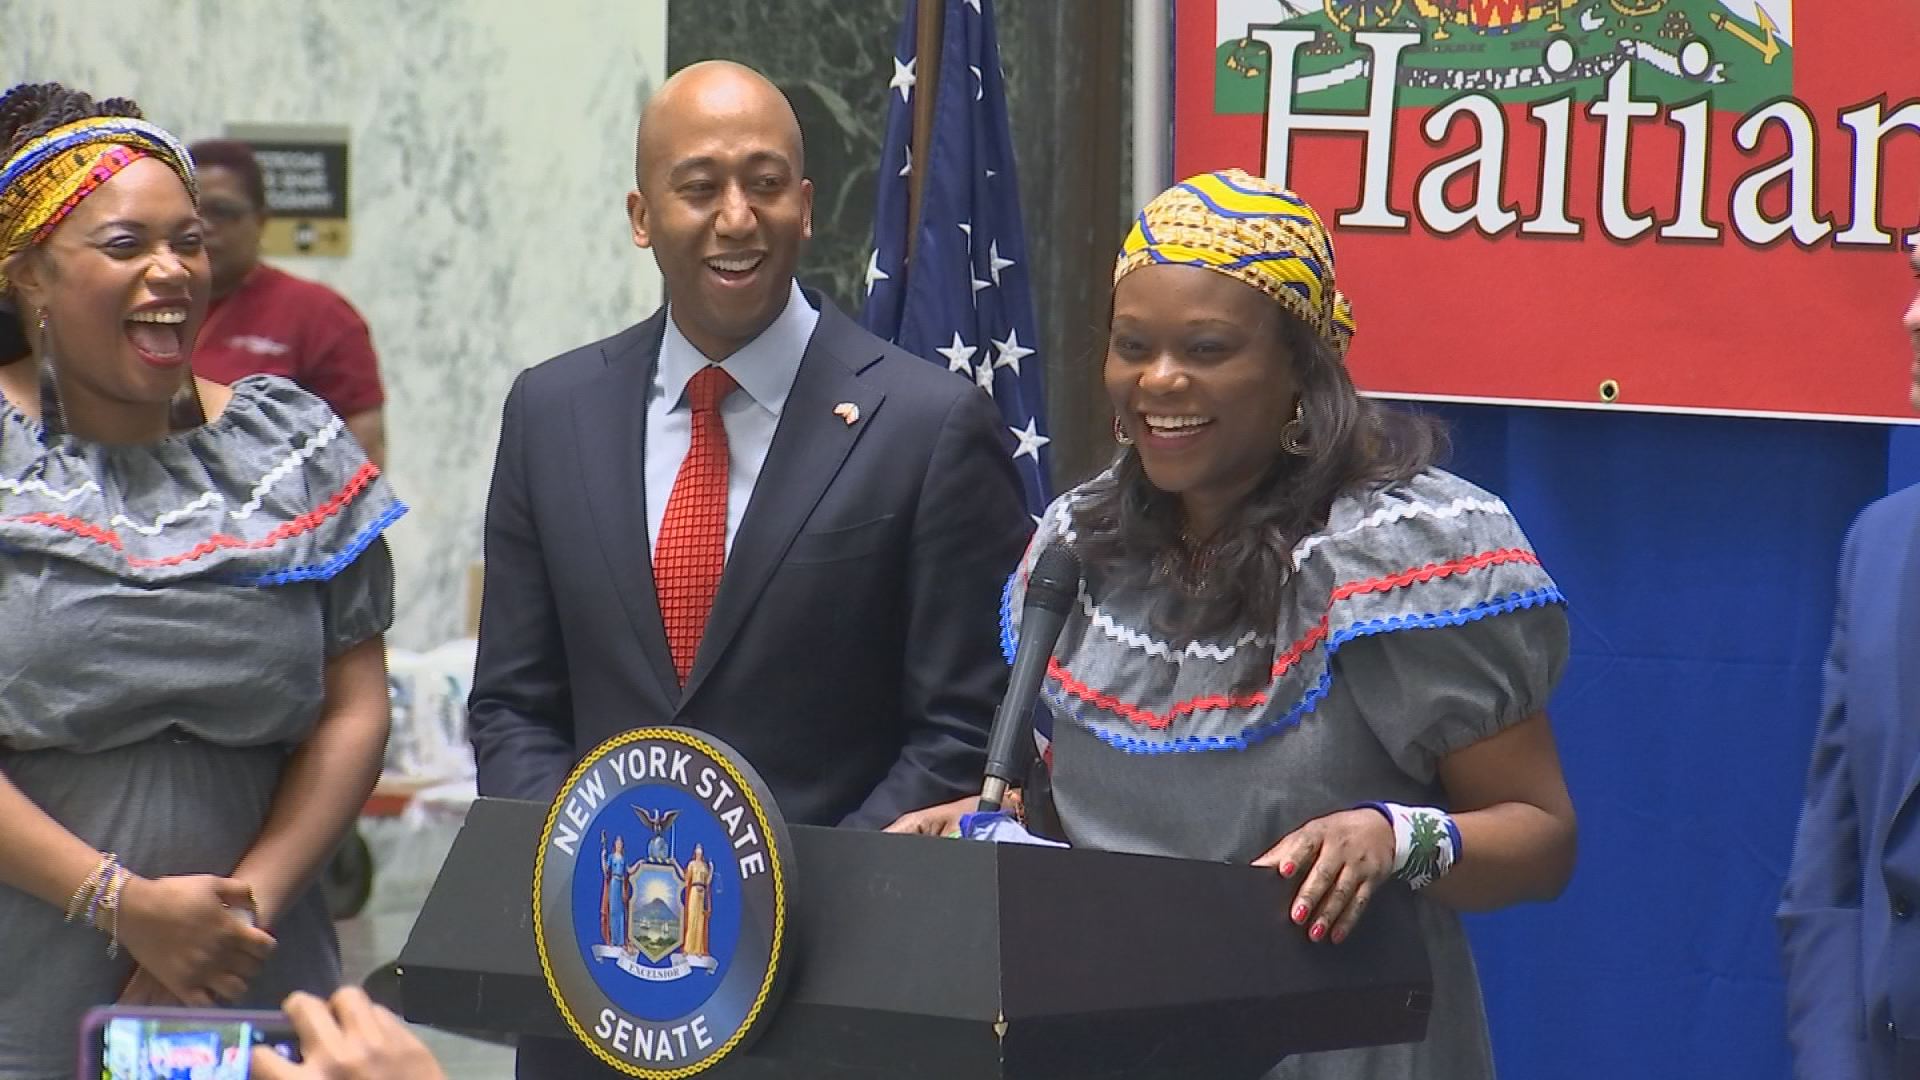 Bichotte Speaks about Haitian Unity Day